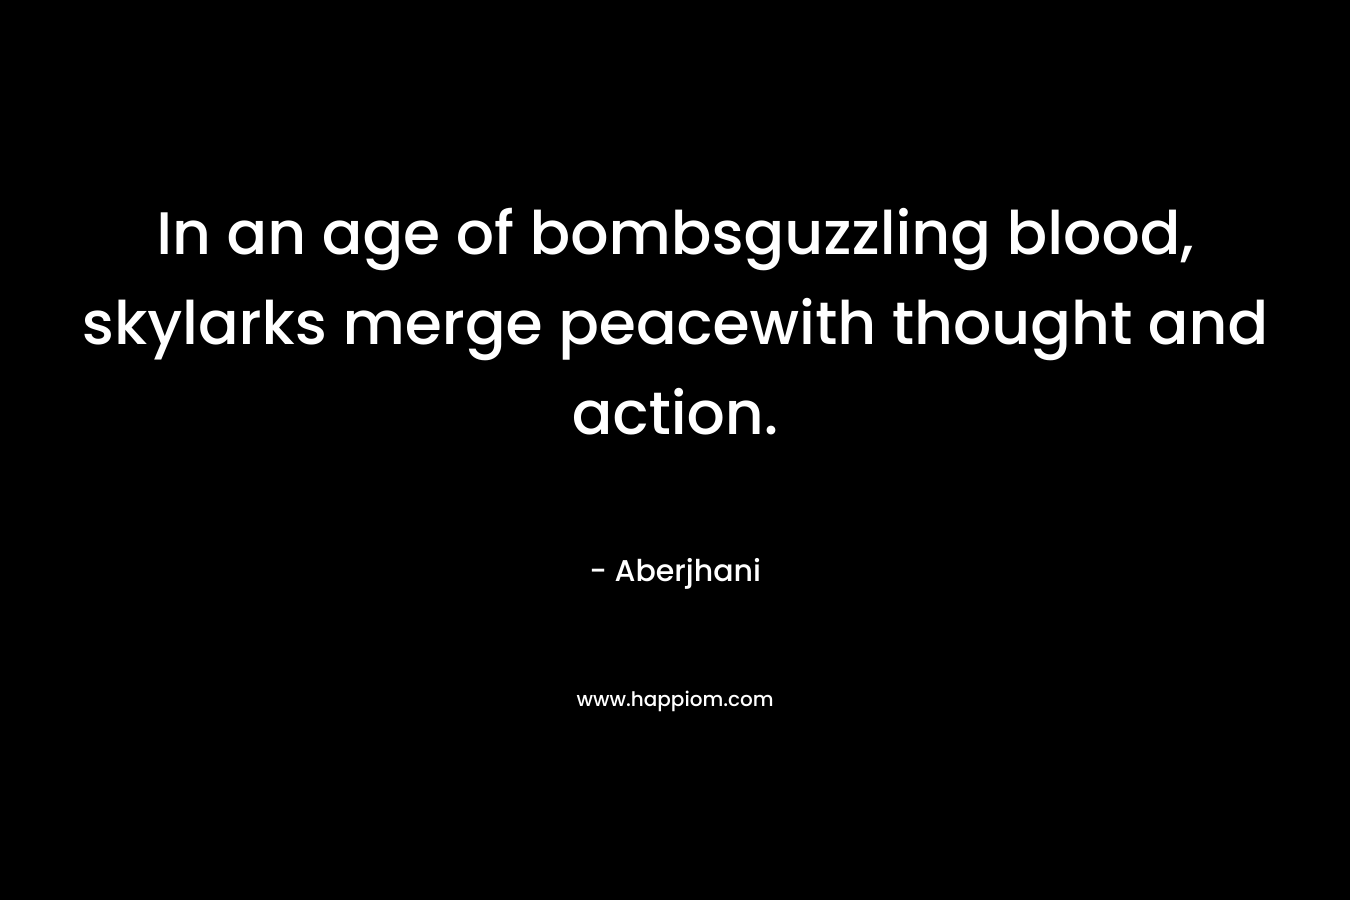 In an age of bombsguzzling blood, skylarks merge peacewith thought and action. – Aberjhani